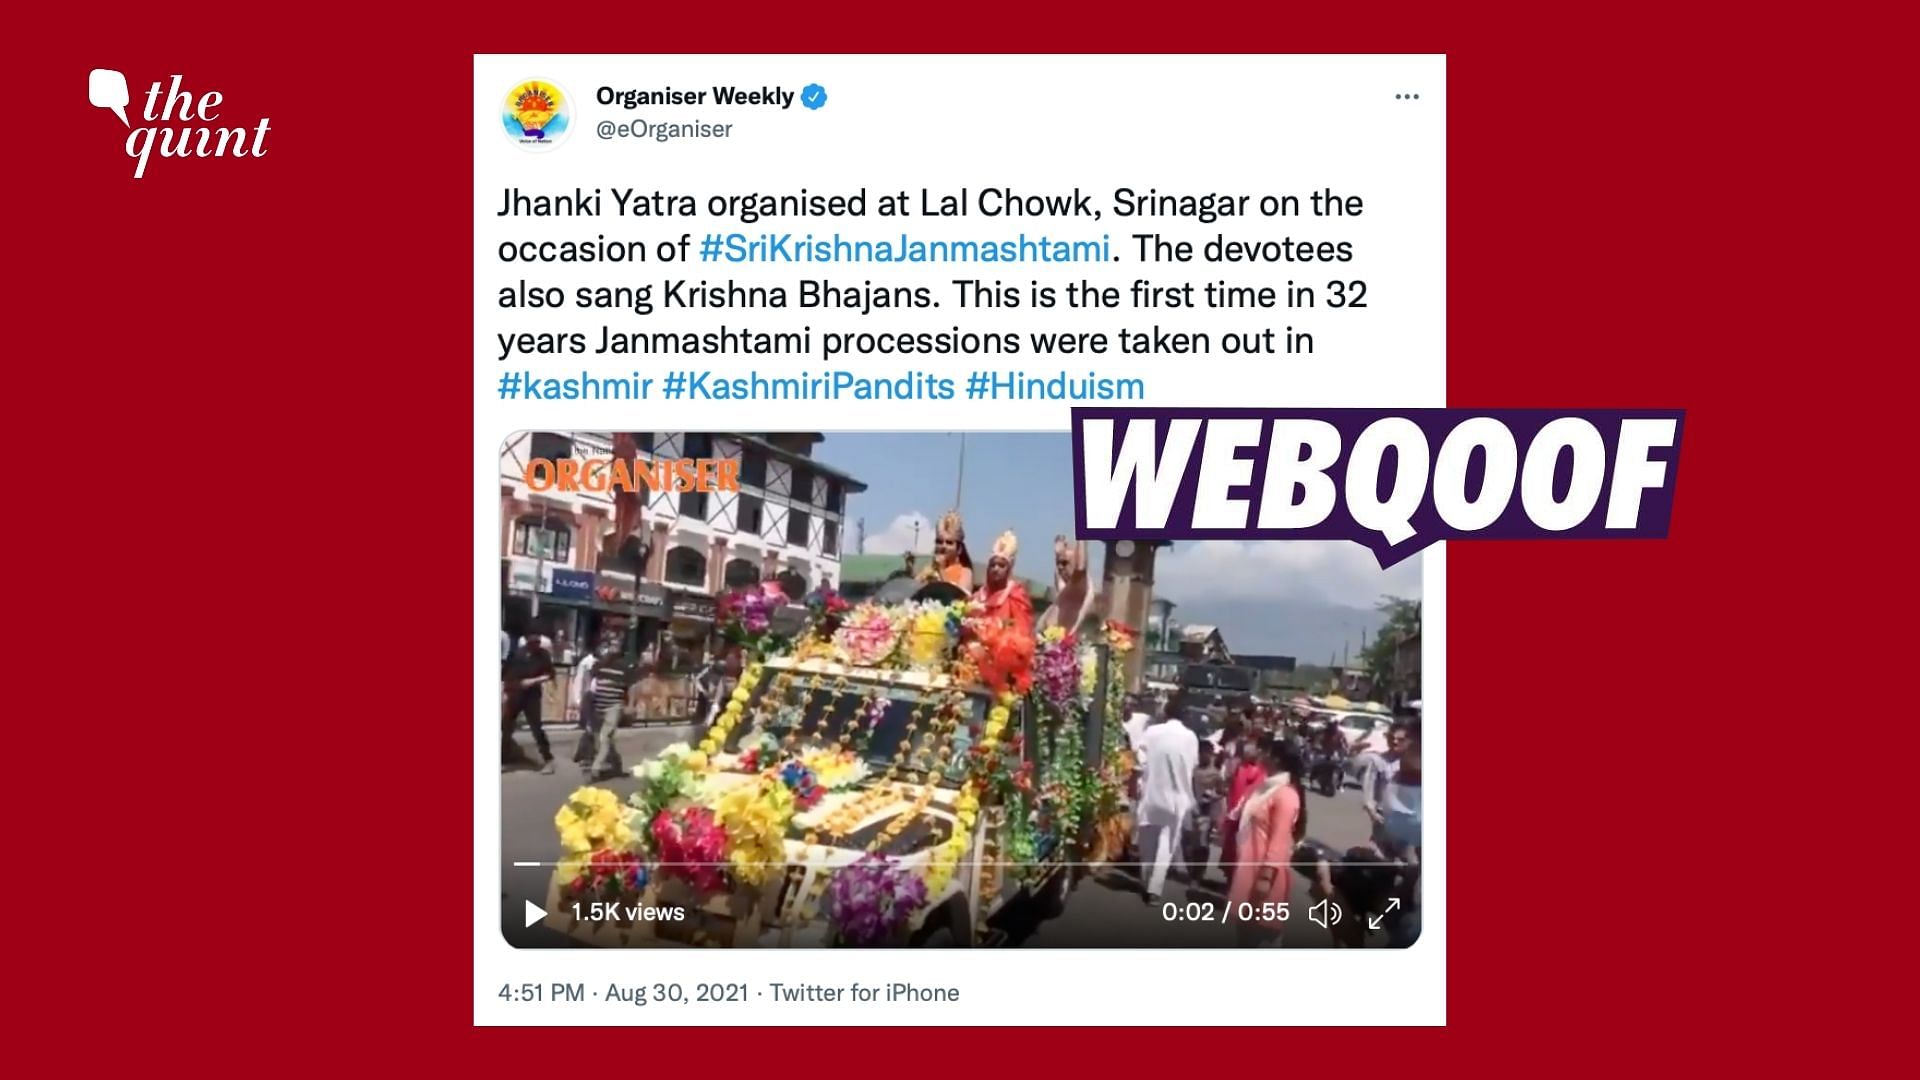 <div class="paragraphs"><p>Media outlets and social media users shared a false narrative that Srinagar witnessed its first Janmashtami celebrations in 32 years.</p></div><div class="paragraphs"><p></p><p><br></p></div>